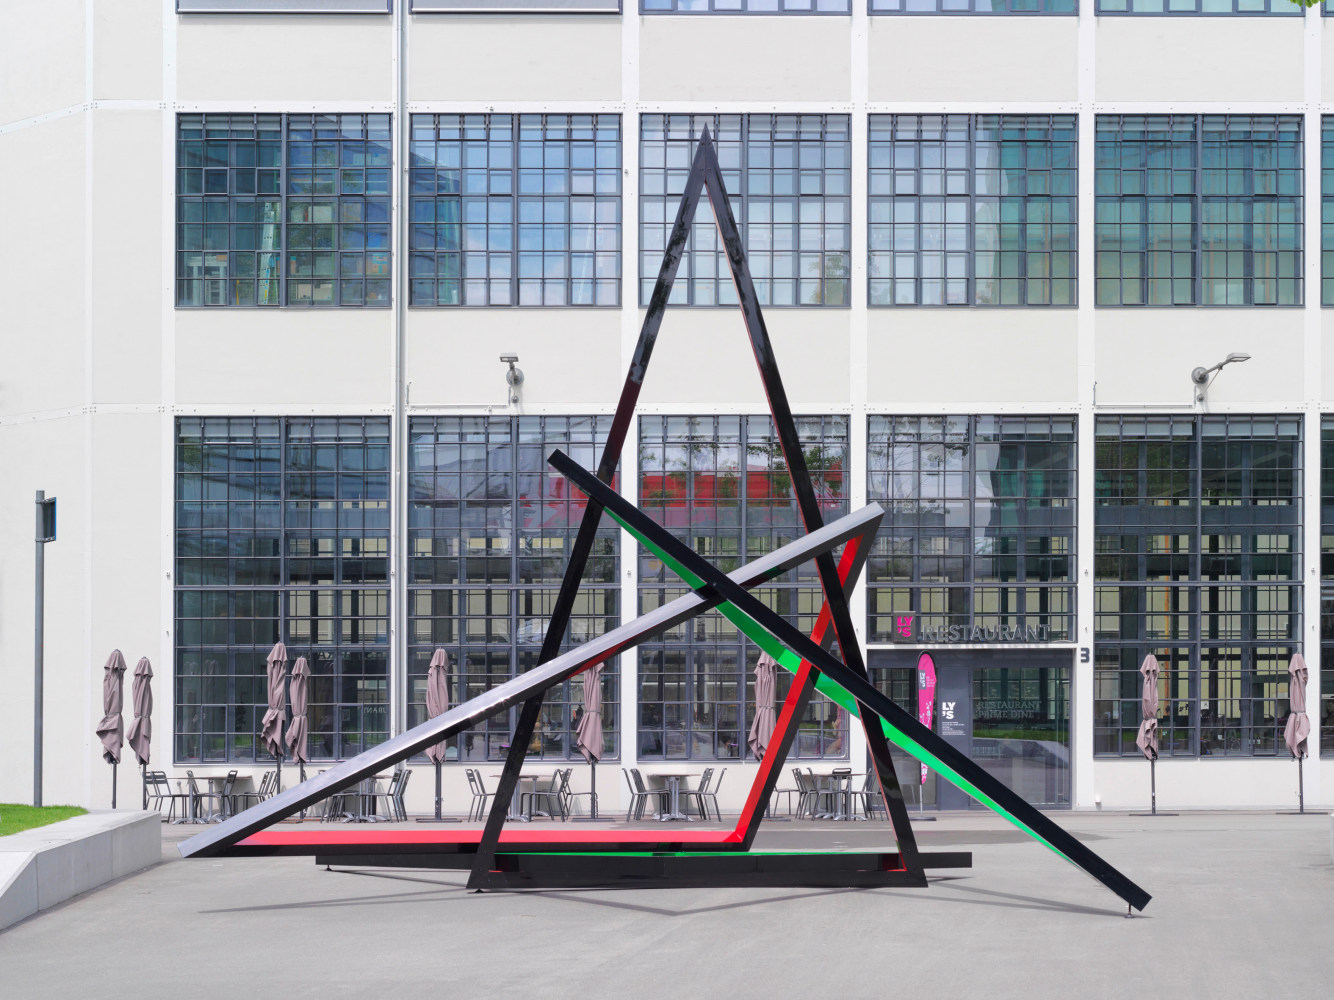 Eva Rothschild

This and this and this

2013

Aluminum, steel, powder coating, clear varnish

216 1/2 x 301 1/8 x 210 1/4 inches (549.9 x 764.9 x 534 cm)

Edition&amp;nbsp;of 3, with 1 AP

ER 107

&amp;nbsp;